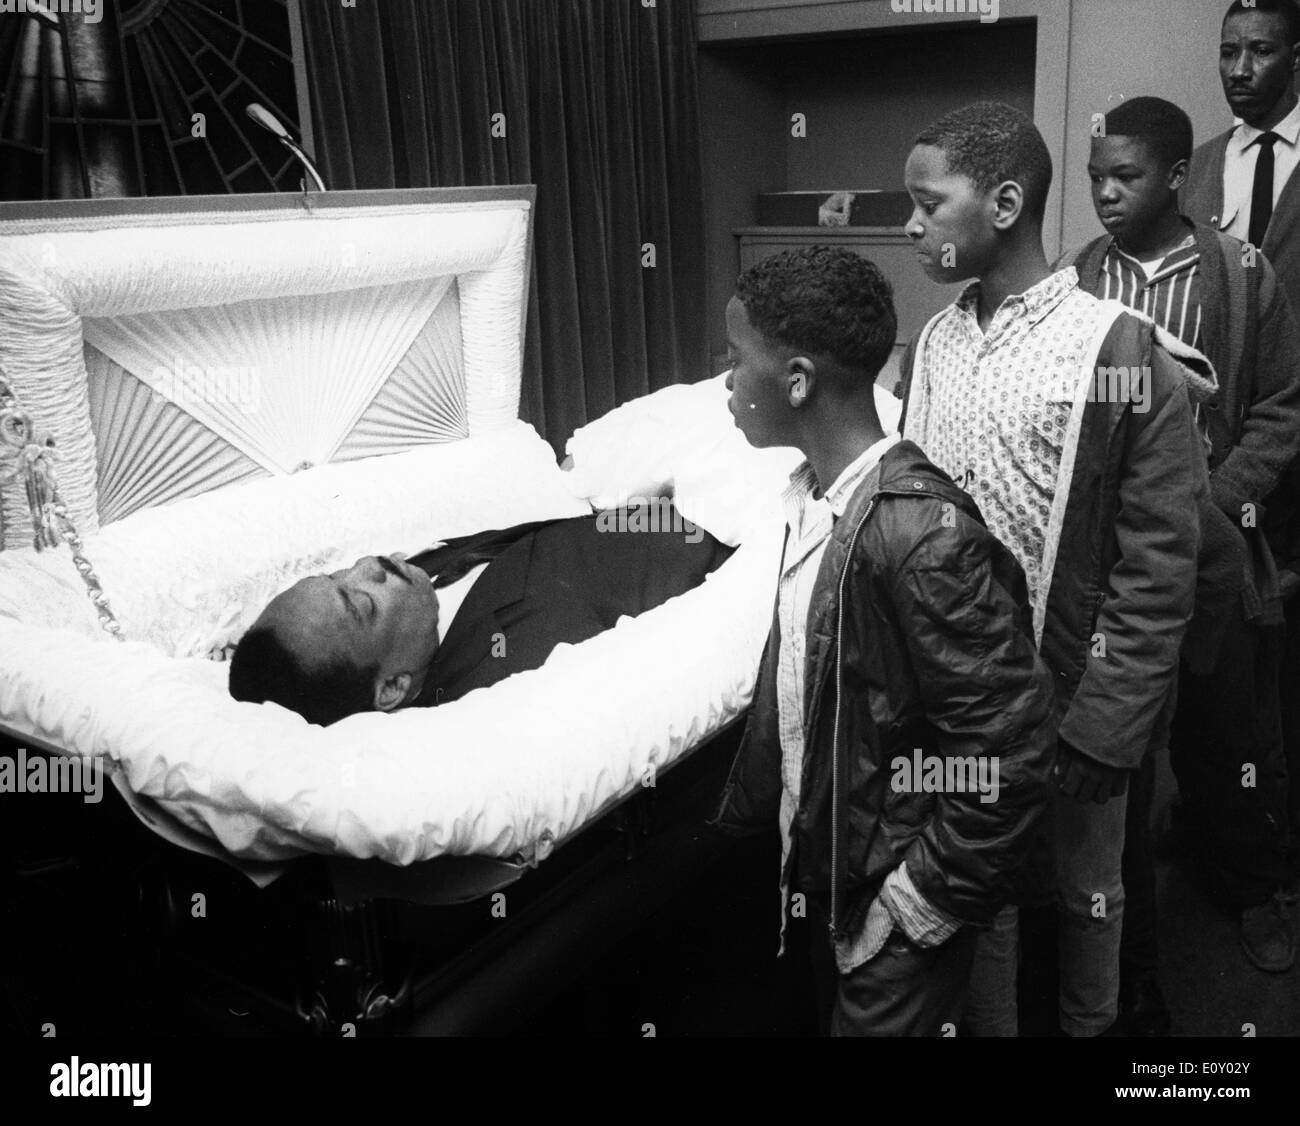 Funeral of reverend Martin Luther King Jr. Stock Photo